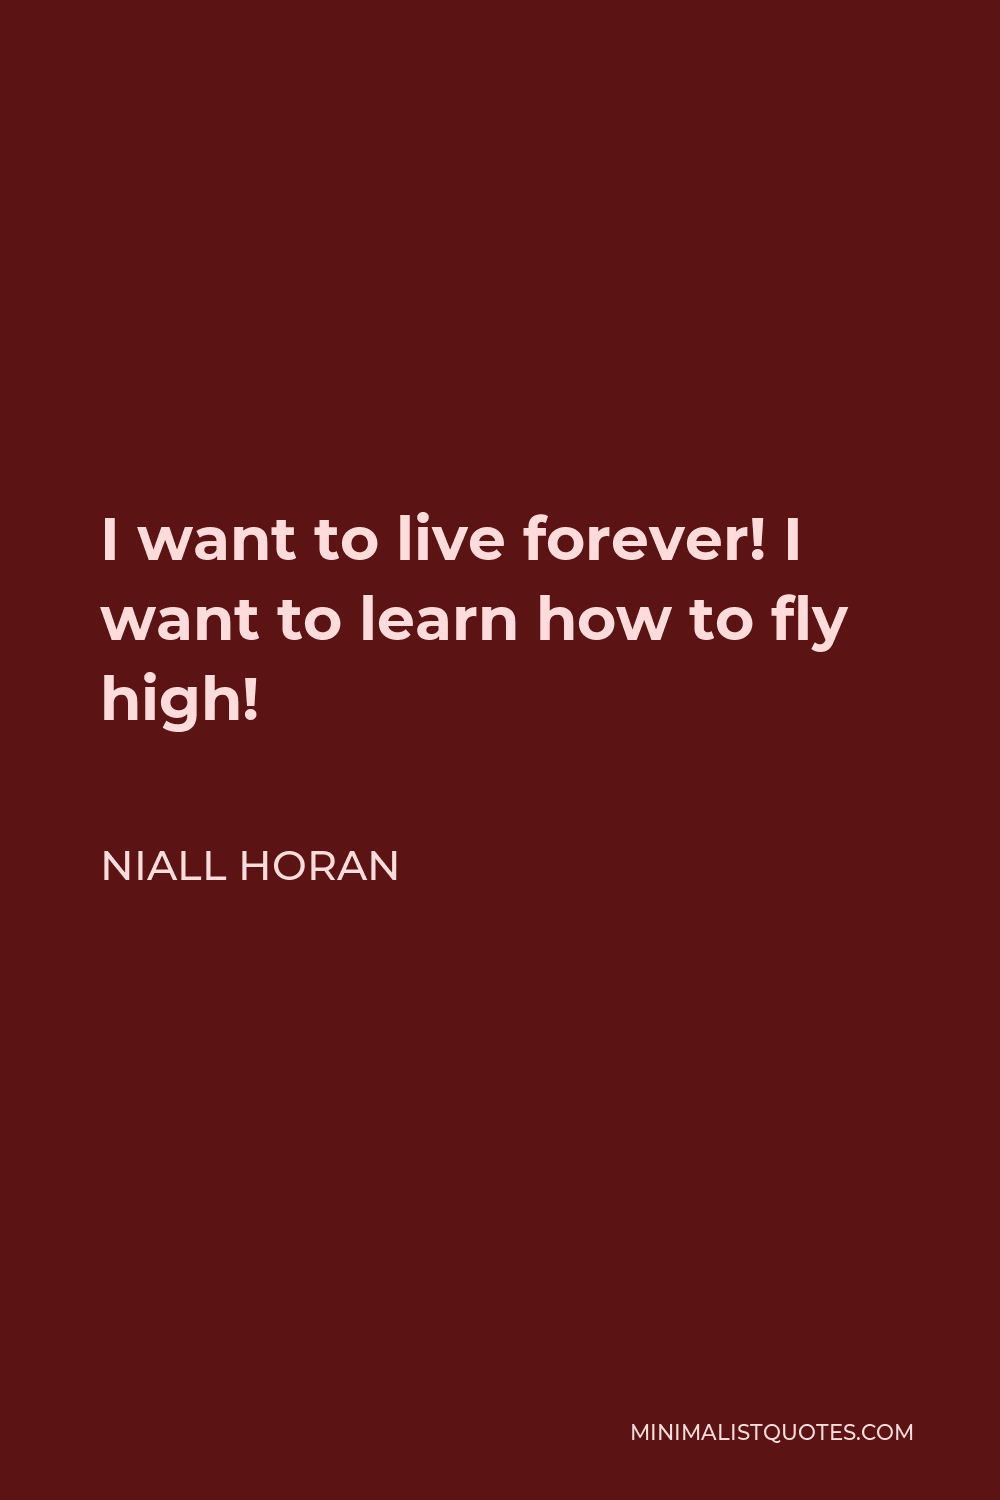 Niall Horan Quote - I want to live forever! I want to learn how to fly high!